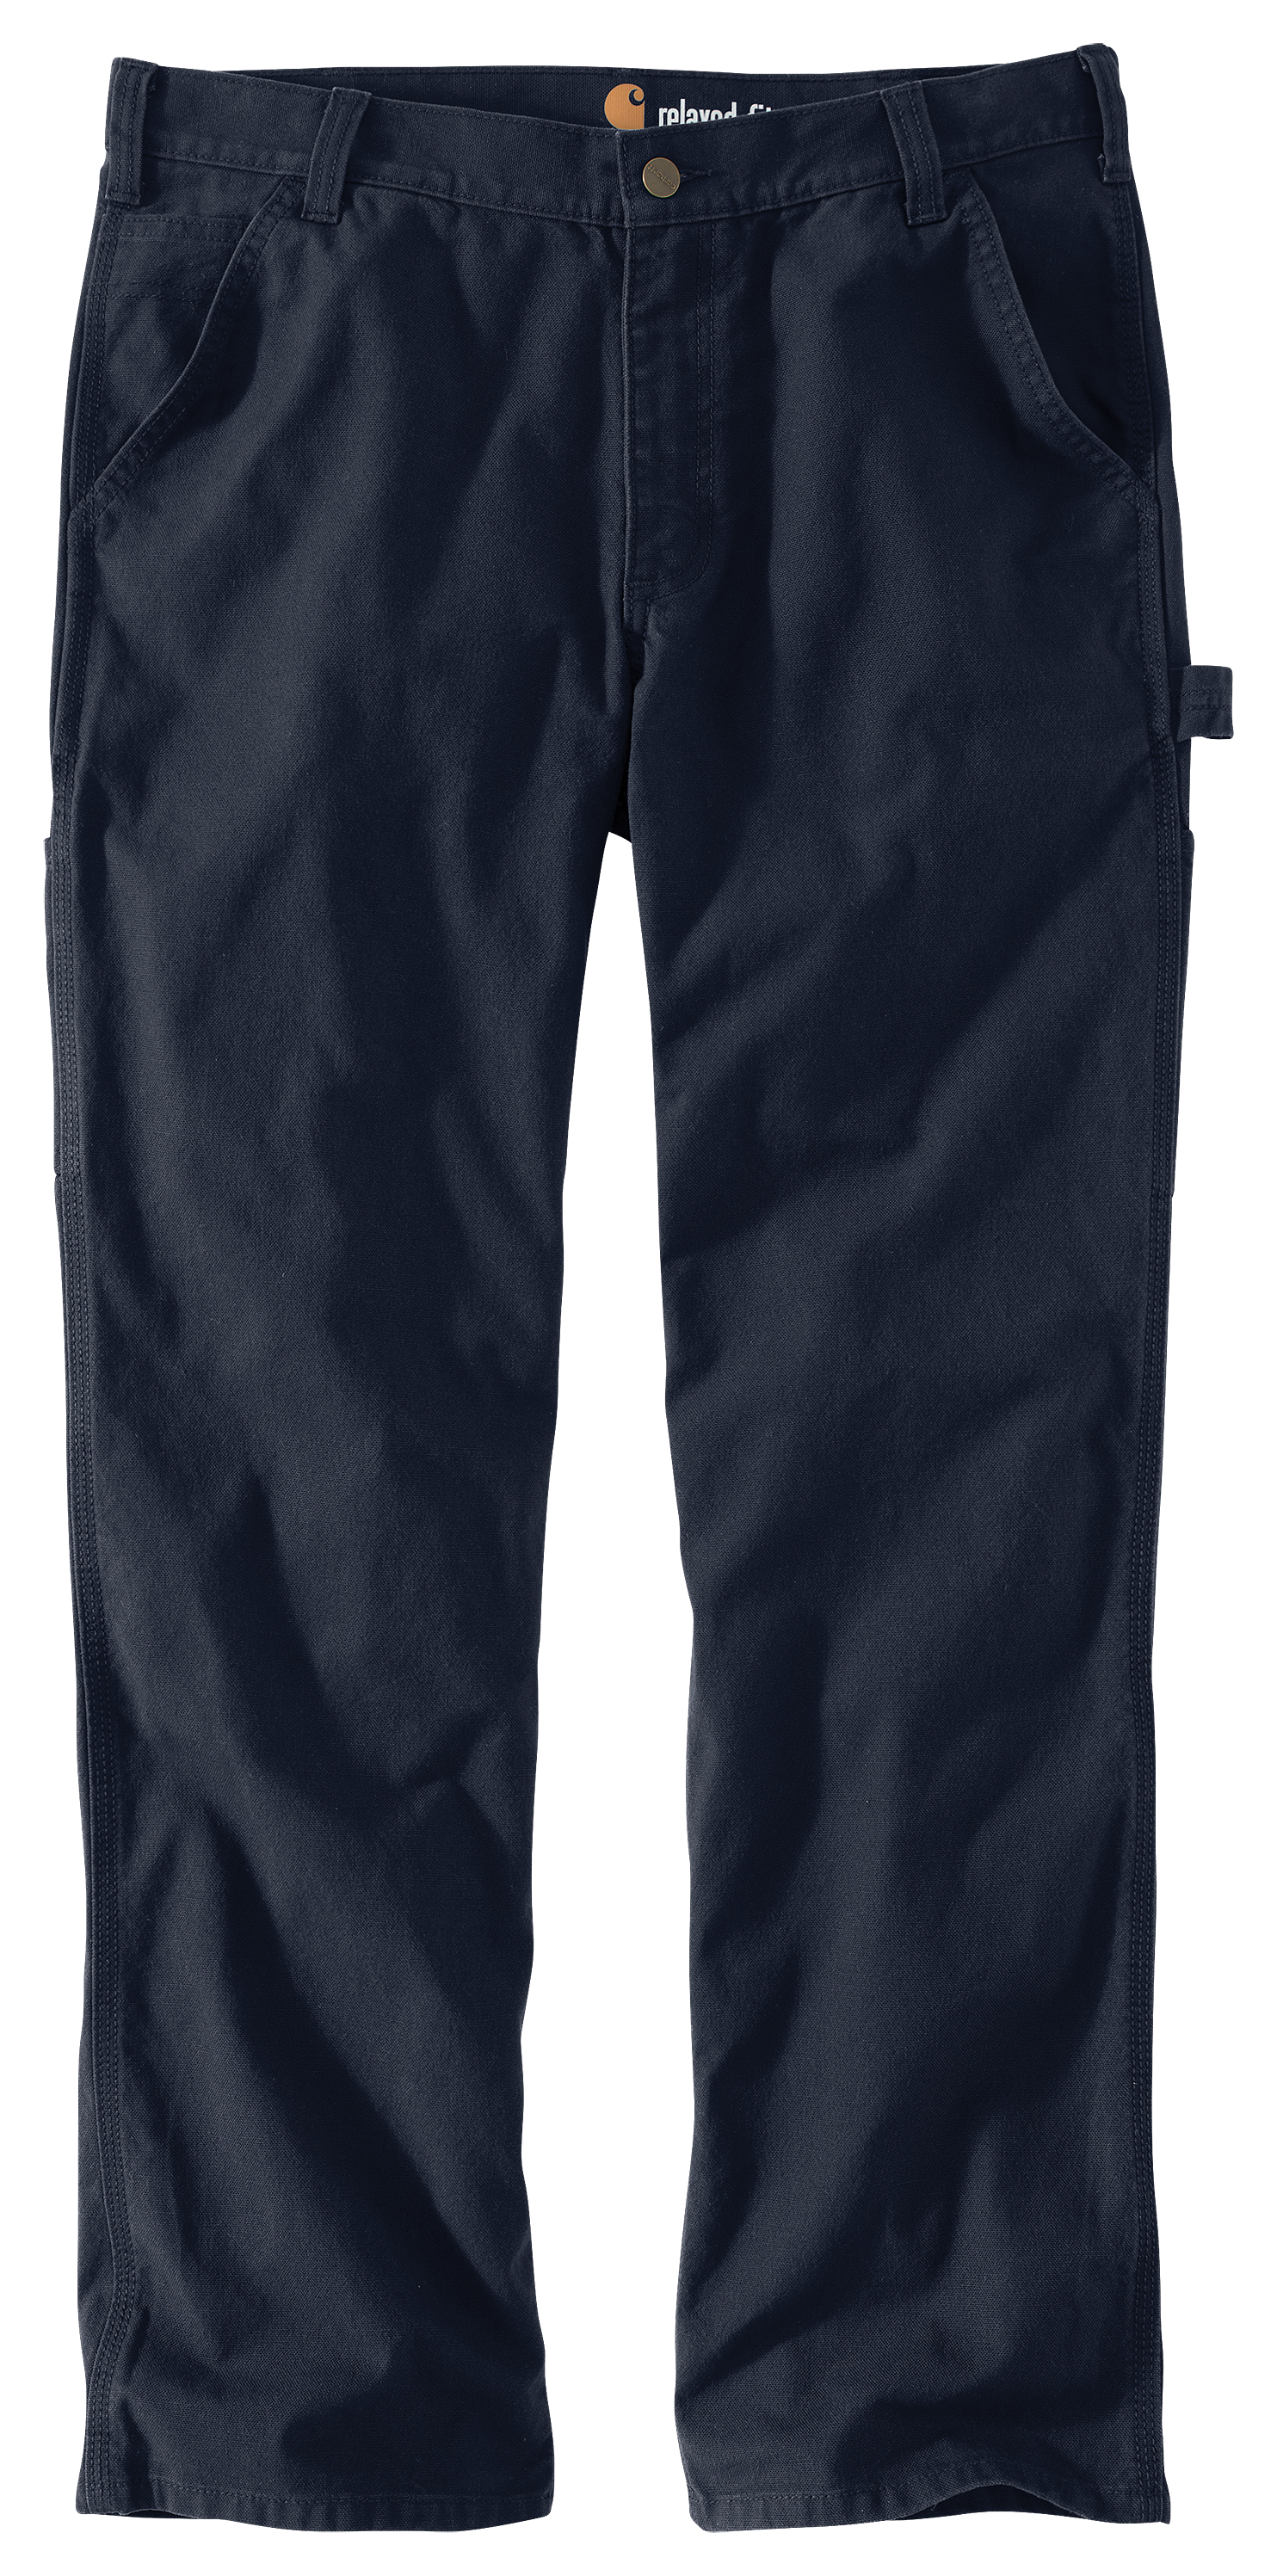 Carhartt Flame-Resistant Force Ripstop Utility Work Pants